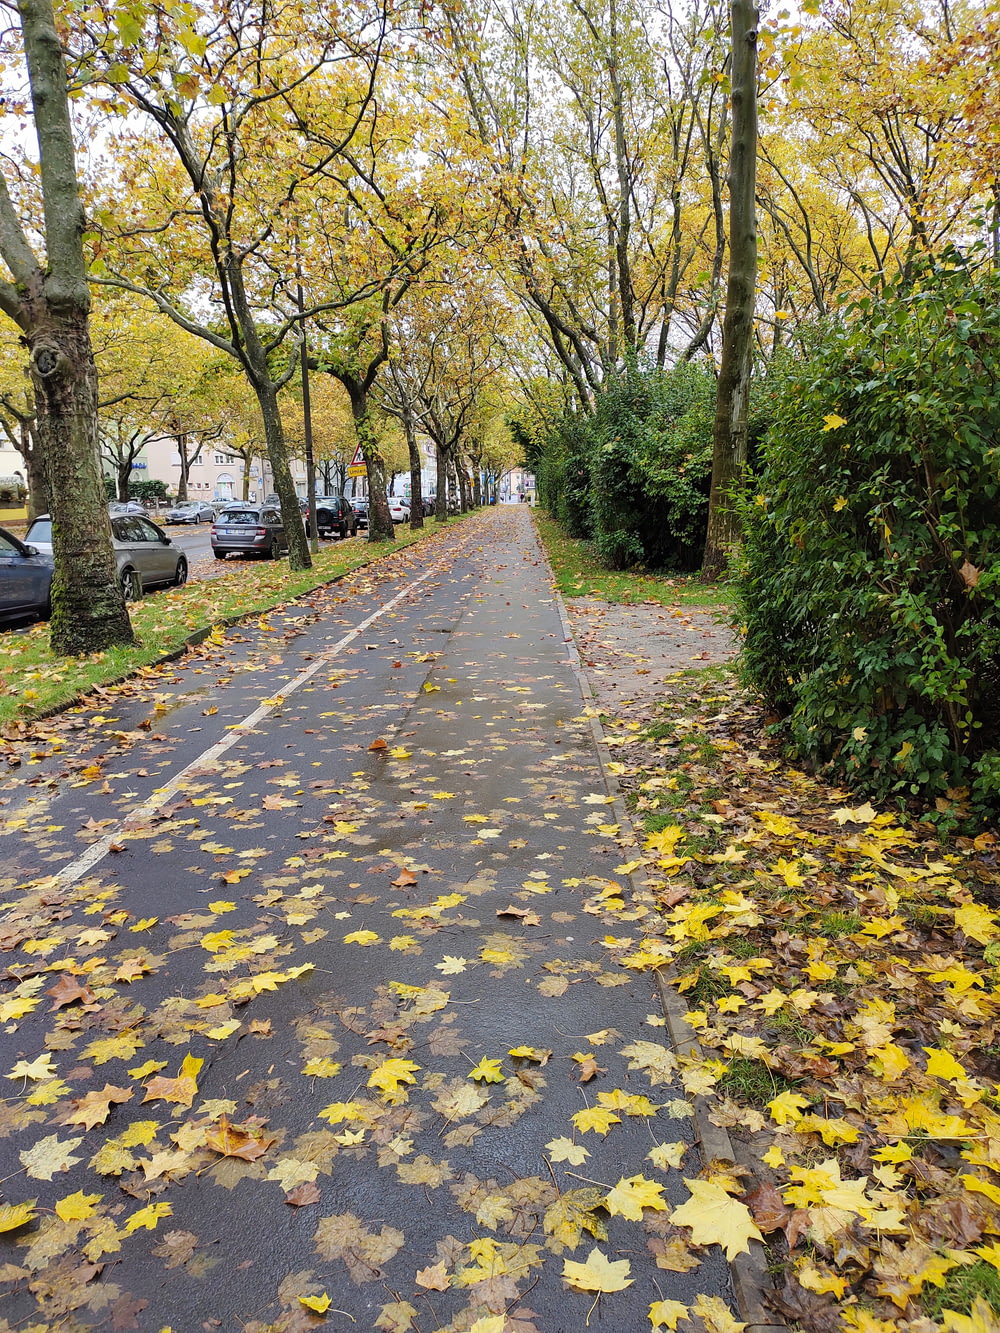 a wet road with yellow leaves on the ground